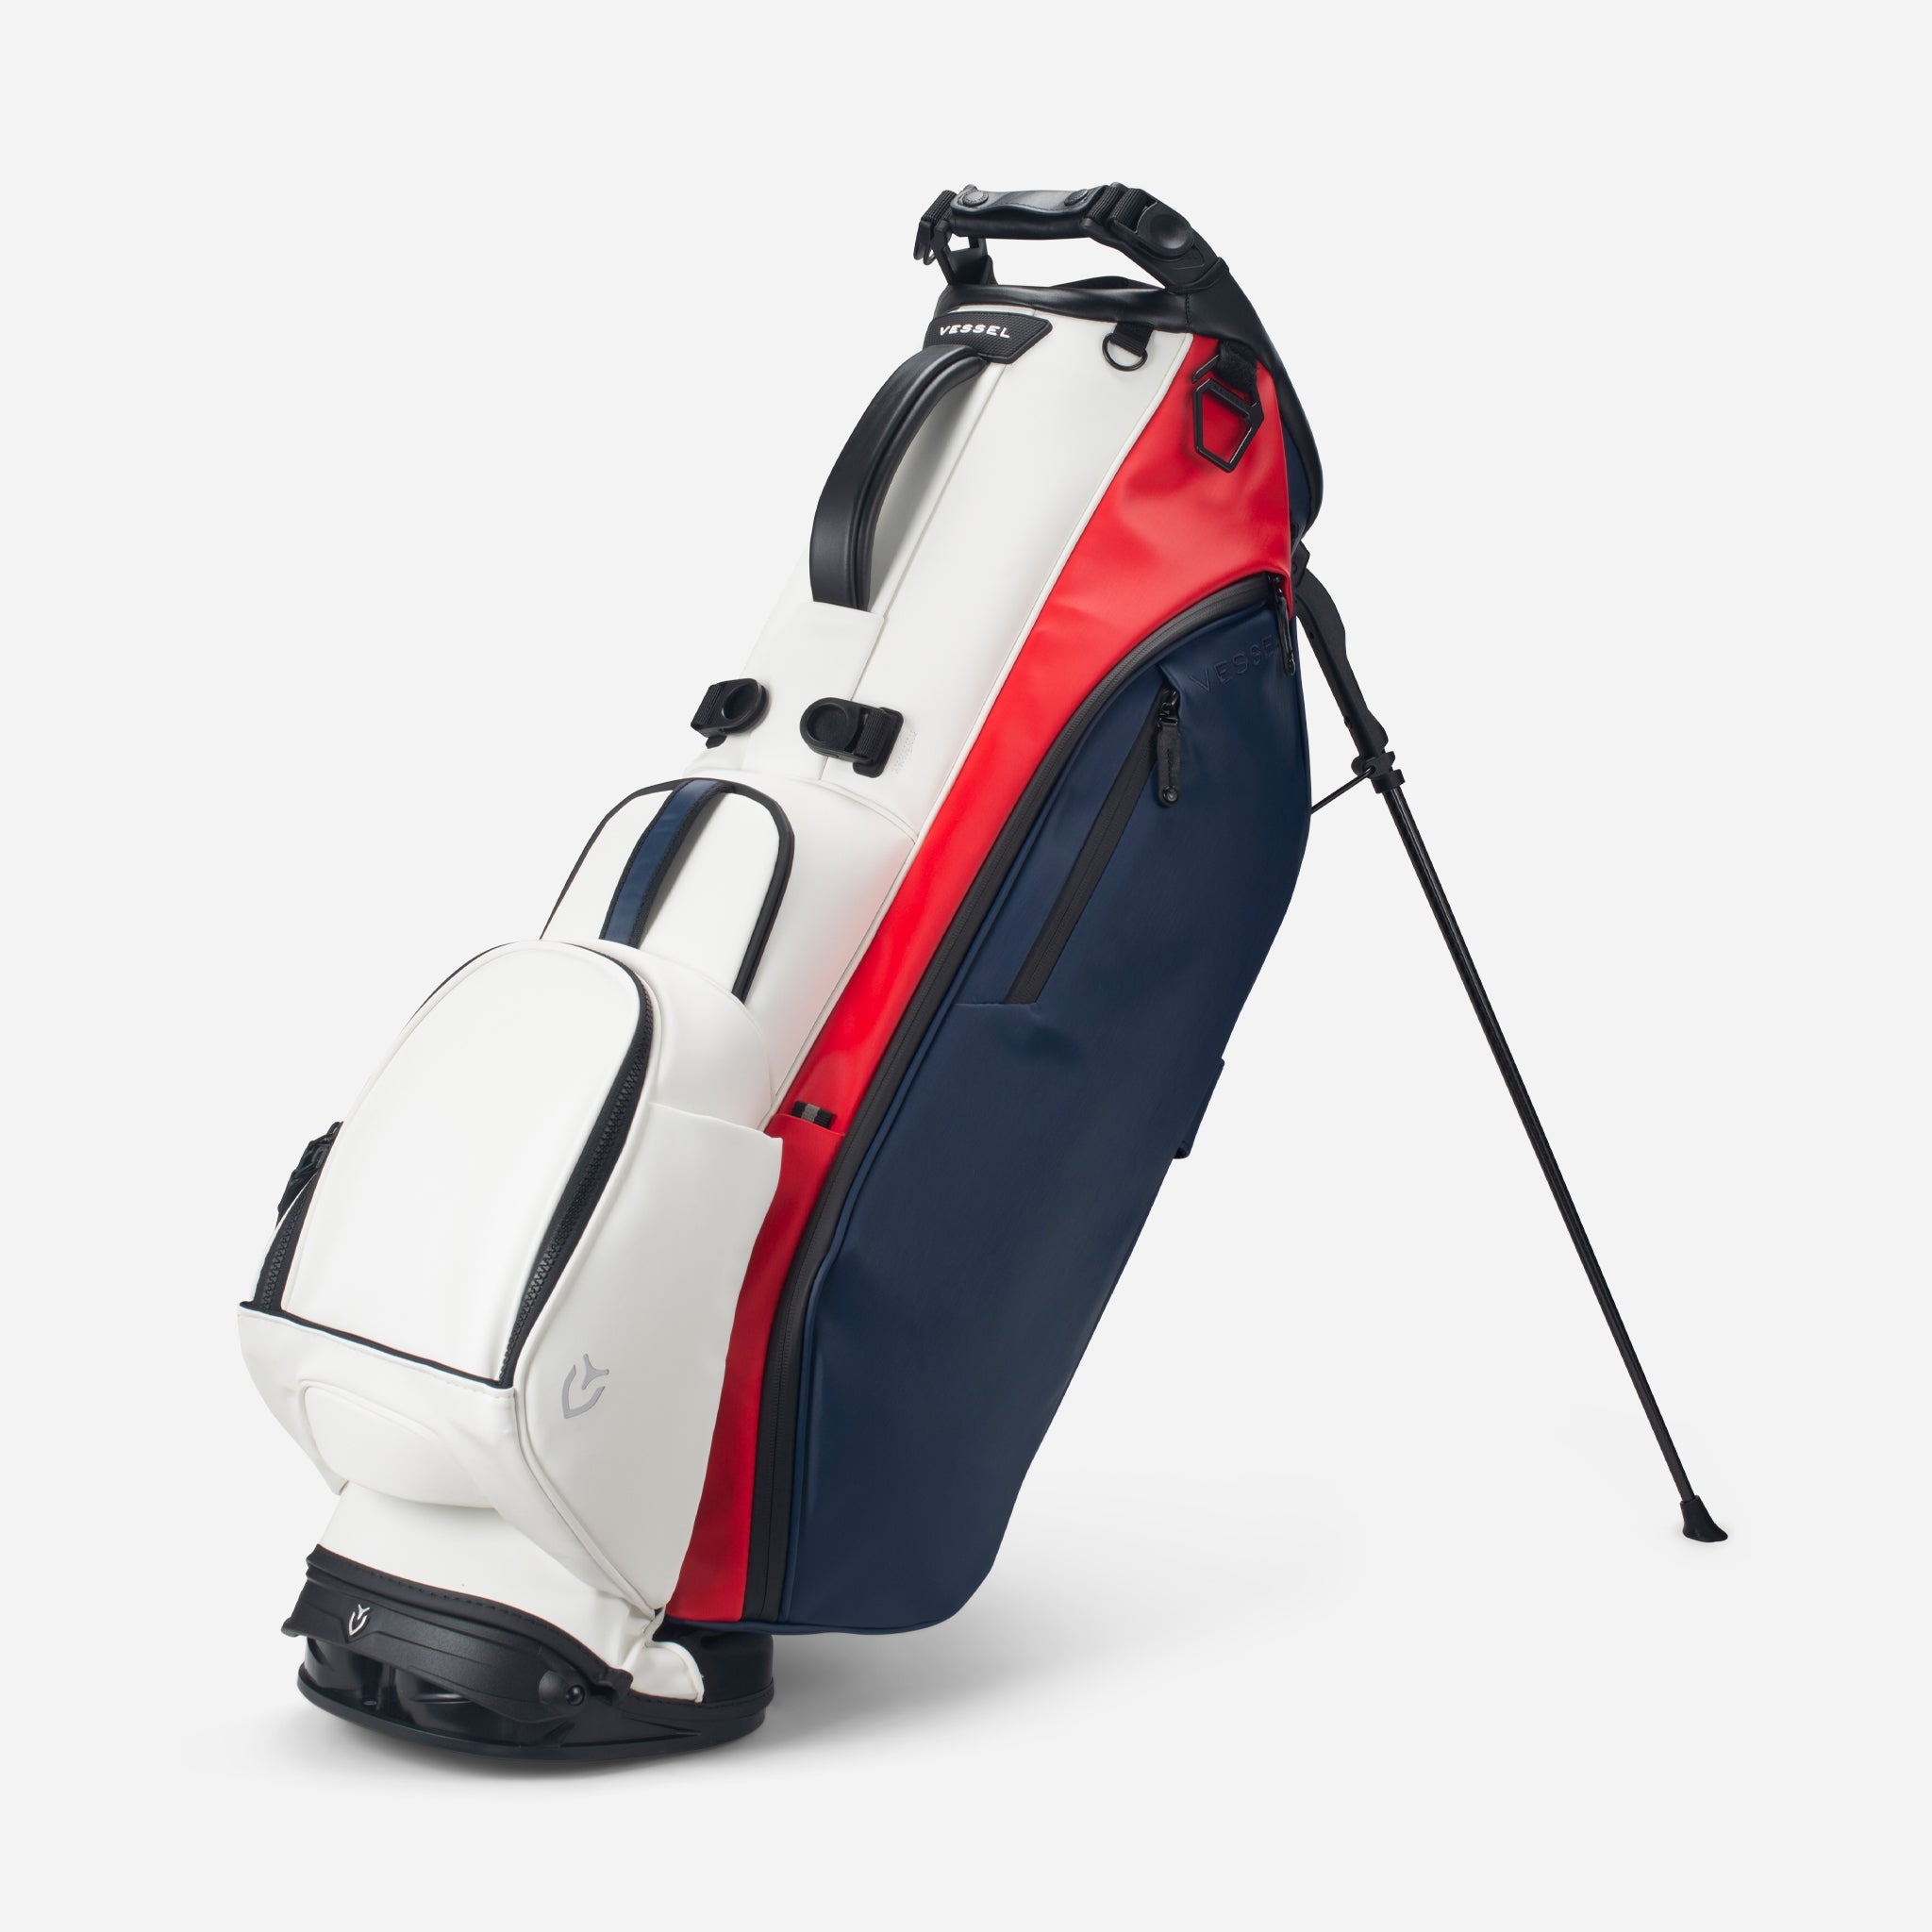 9 golf bags for golfers looking for a style upgrade | Golf Equipment: Clubs,  Balls, Bags | Golf Digest